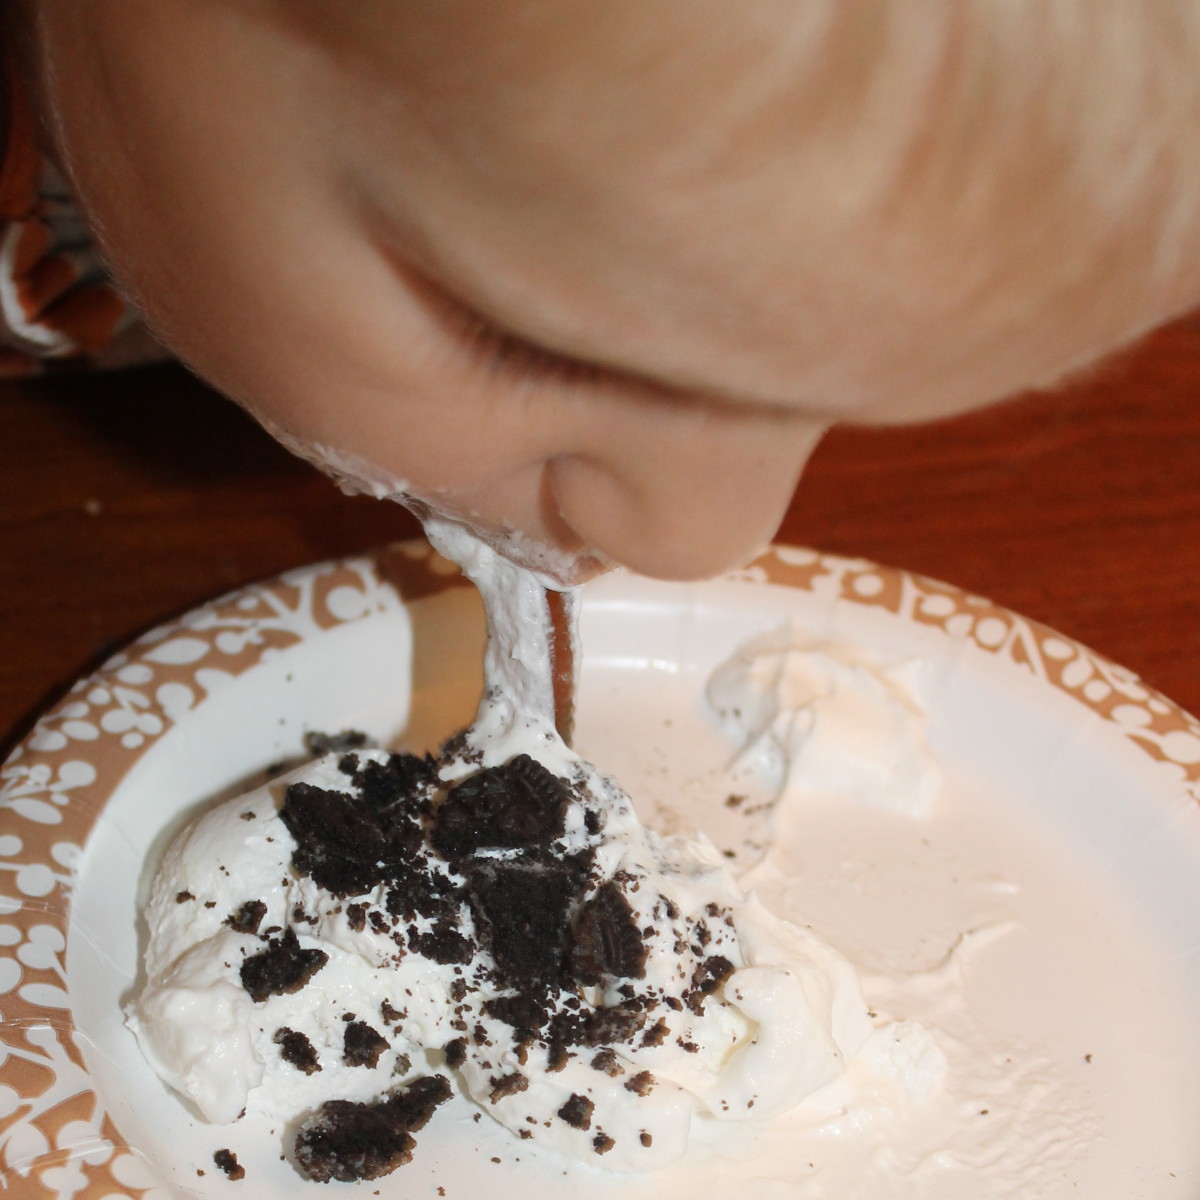 Diet of Worms - Retrieving gummy worms from a plate of Cool Whip and Oreo cookies 